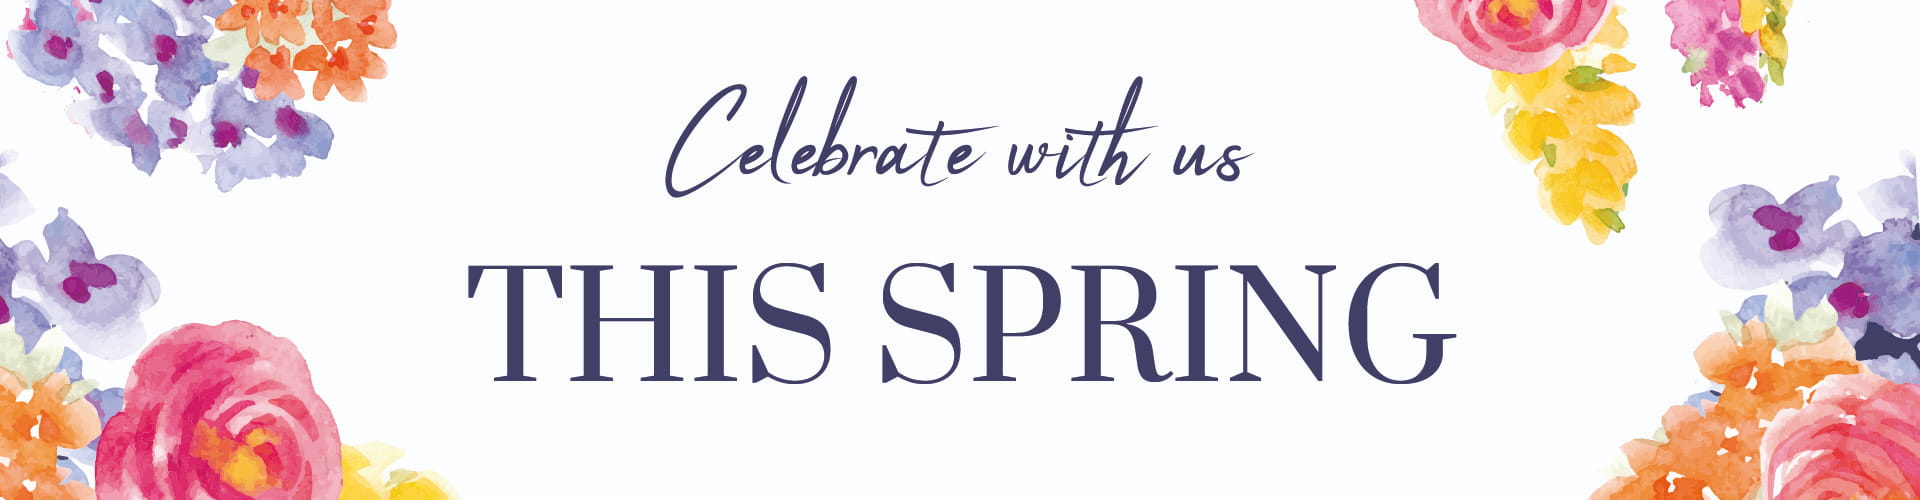 Spring Offers in Amersham | The White Lion